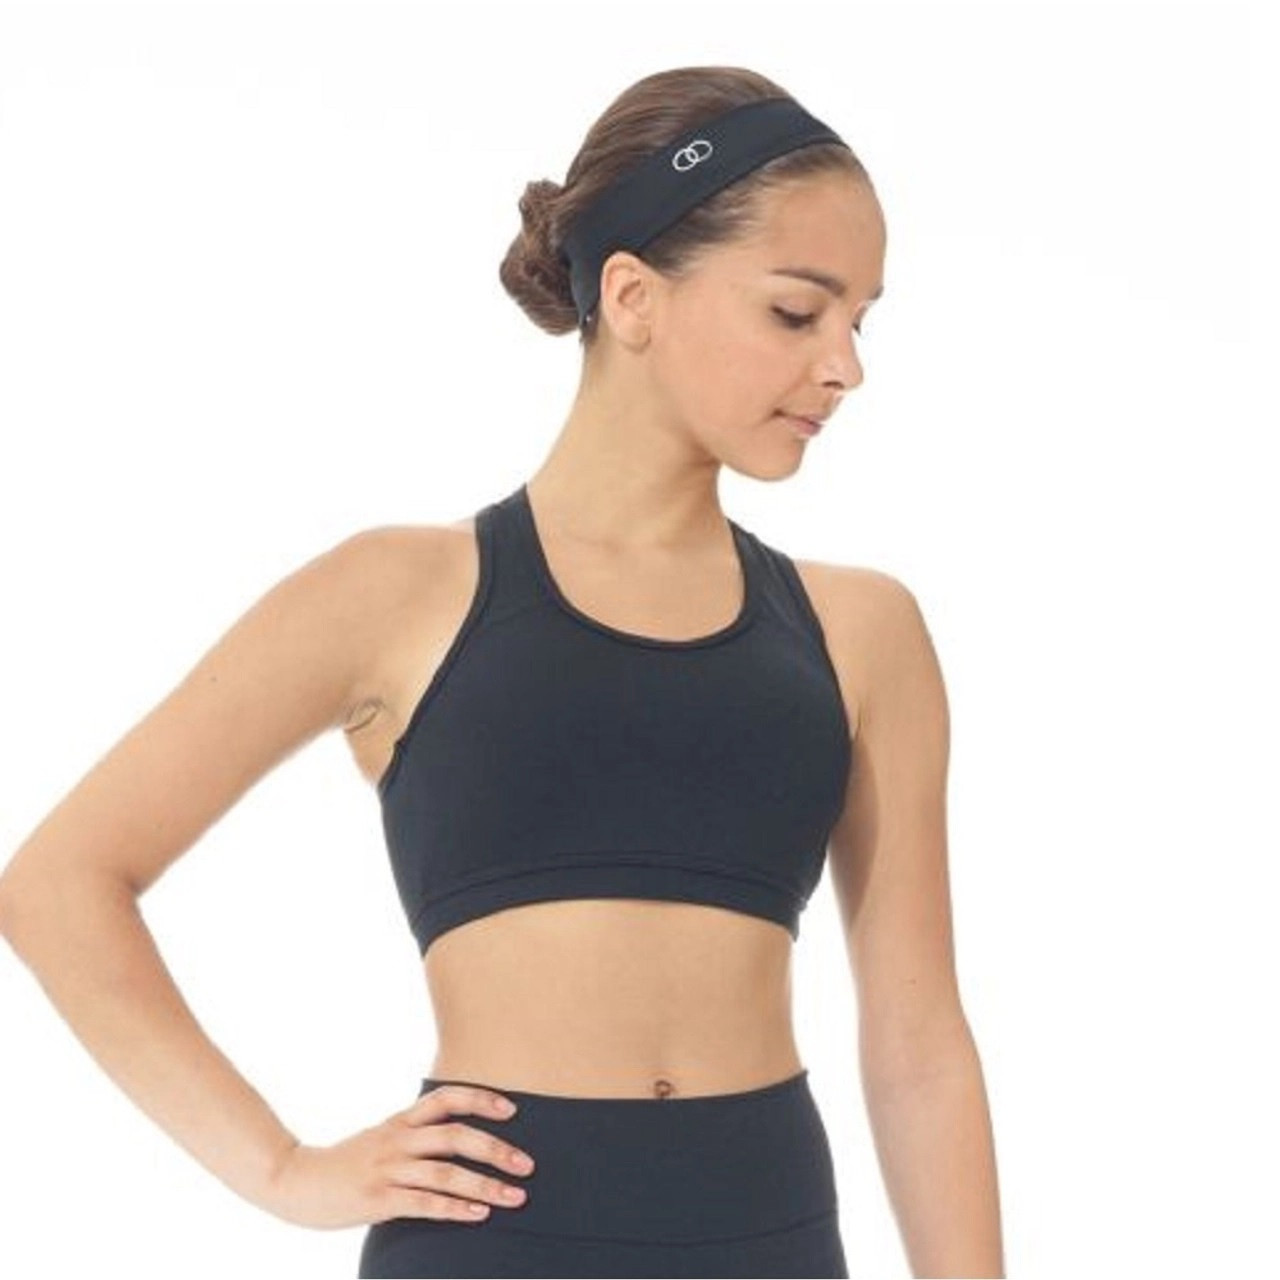 Adult X-Small Matrix Racer Back Supportive Bra Top